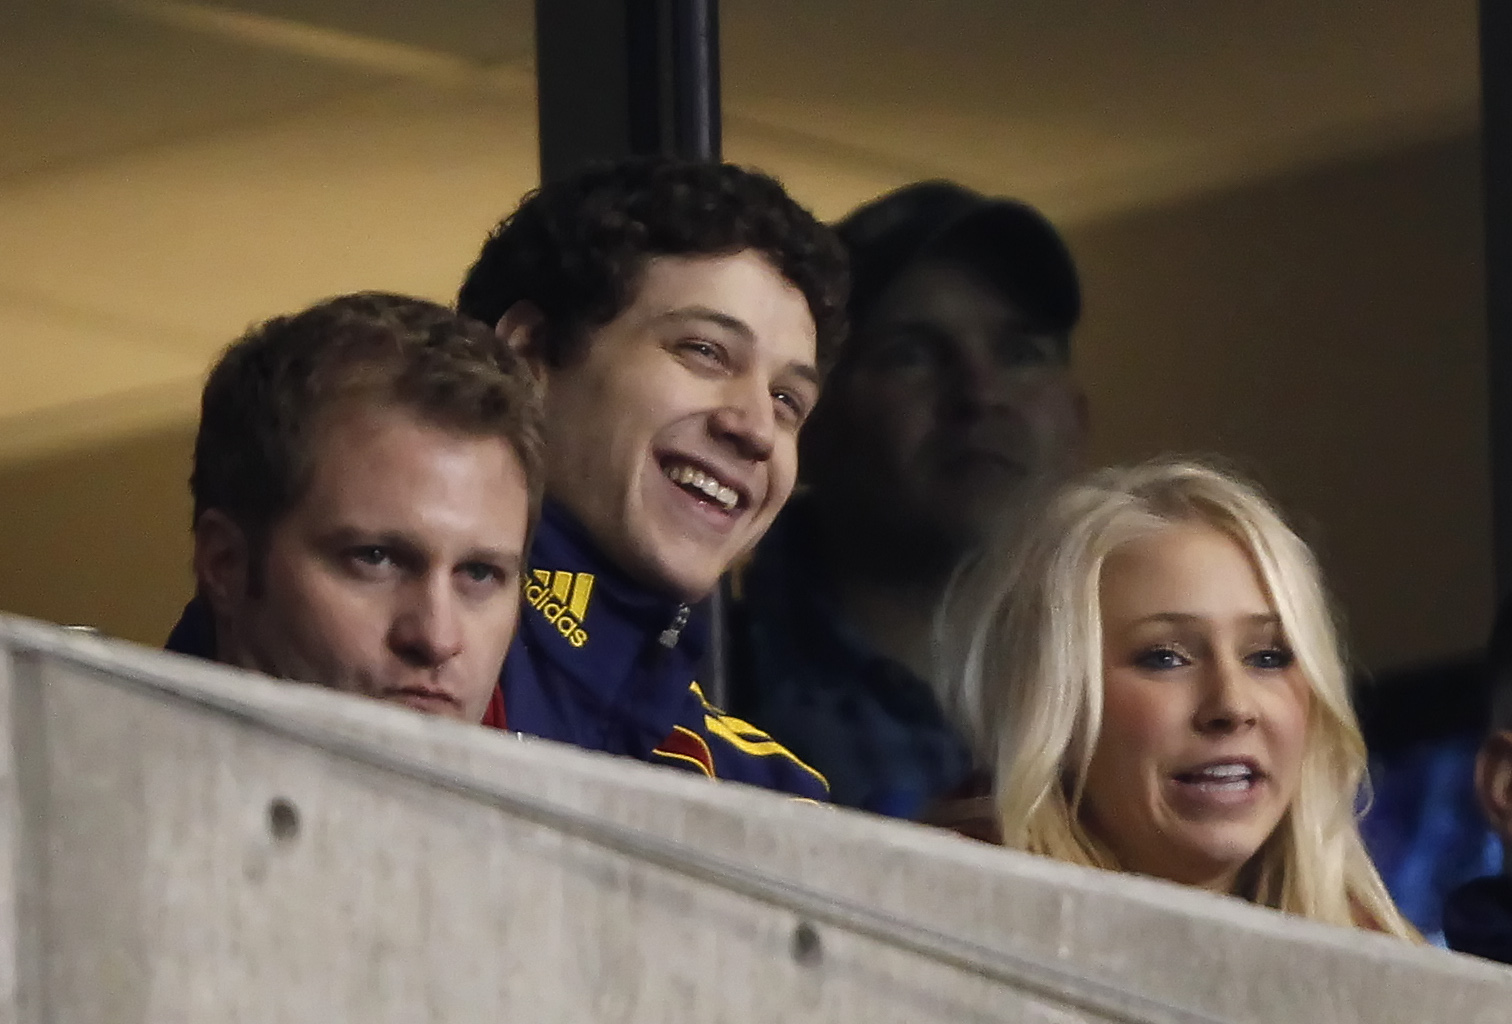 SANDY, UT - MARCH 26: Former BYU basketball player Jimmer Fredette (C) smiles with his girlfriend Whitney Wonnacott (R) during a game against Real Salt Lake and the Los Angeles Galaxy during the second half of an MLS soccer game March 26, 2011 at Rio Tint